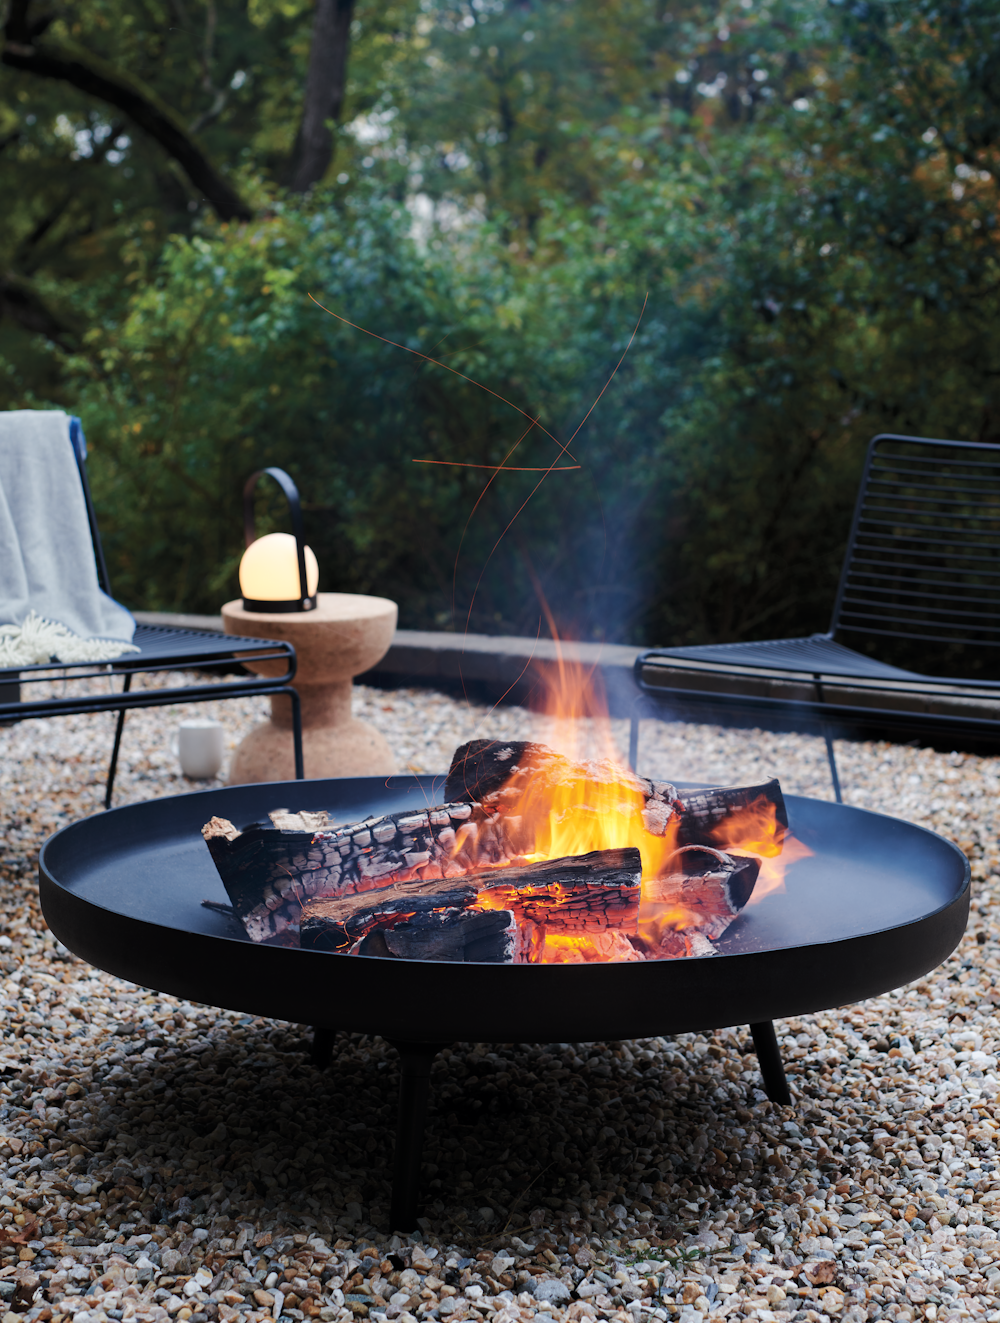 Deco Fire Bowl in an outdoor courtyard setting